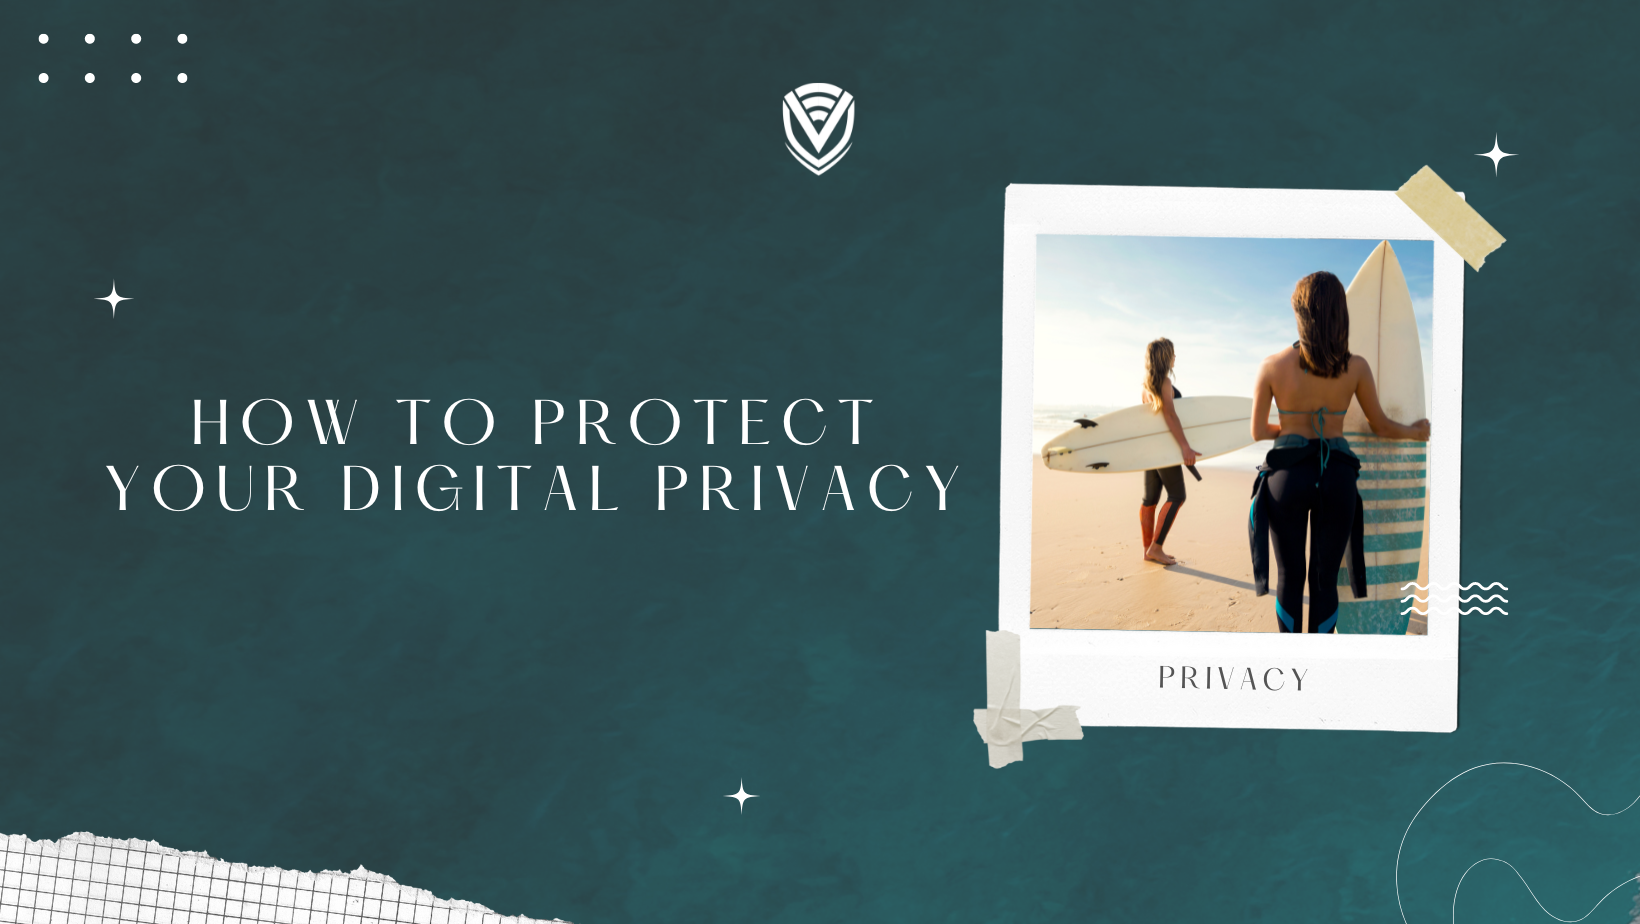 A VPN Will Help You to maintain your Digital Privacy